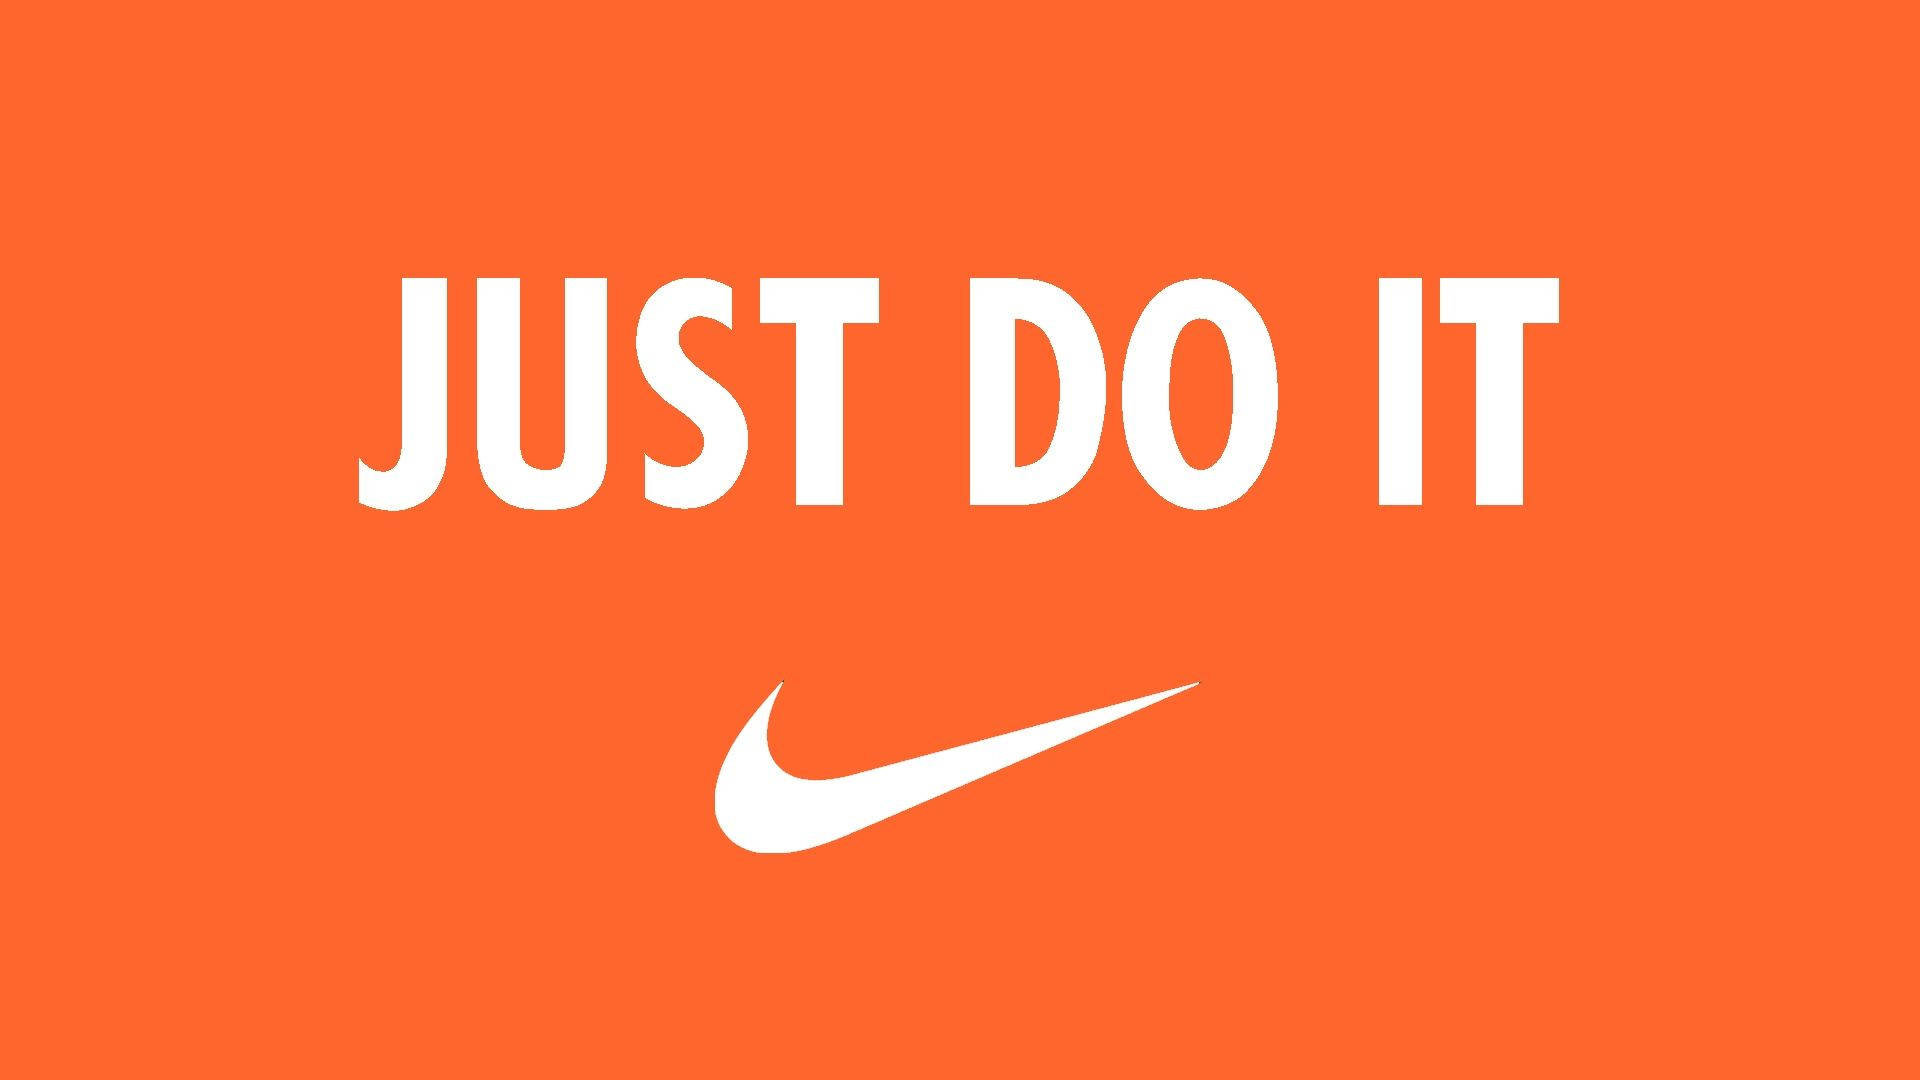 Just Do It Wallpaper for iPhone  Just do it wallpapers Fitness wallpaper  Fitness wallpaper iphone